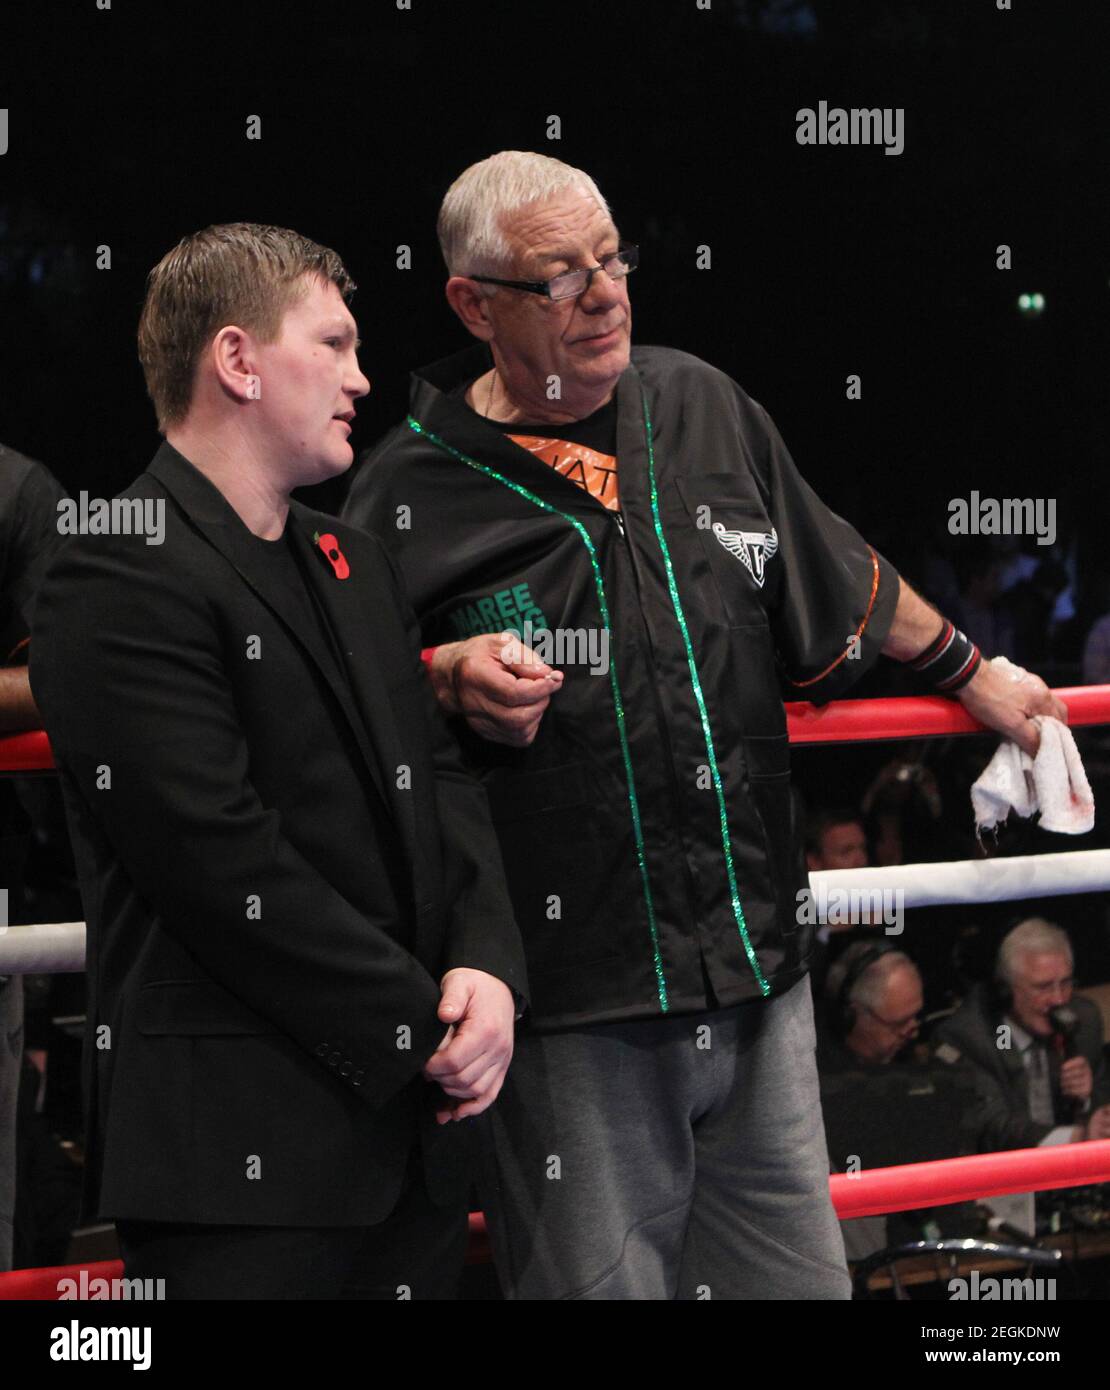 Boxing - George Groves v Kenny Anderson - Commonwealth Super Middleweight Title - Manchester Evening News Arena - 13/11/10  Promoter Ricky Hatton with trainer of Kenny Anderson  Mandatory Credit: Action Images / Andrew Couldridge Stock Photo